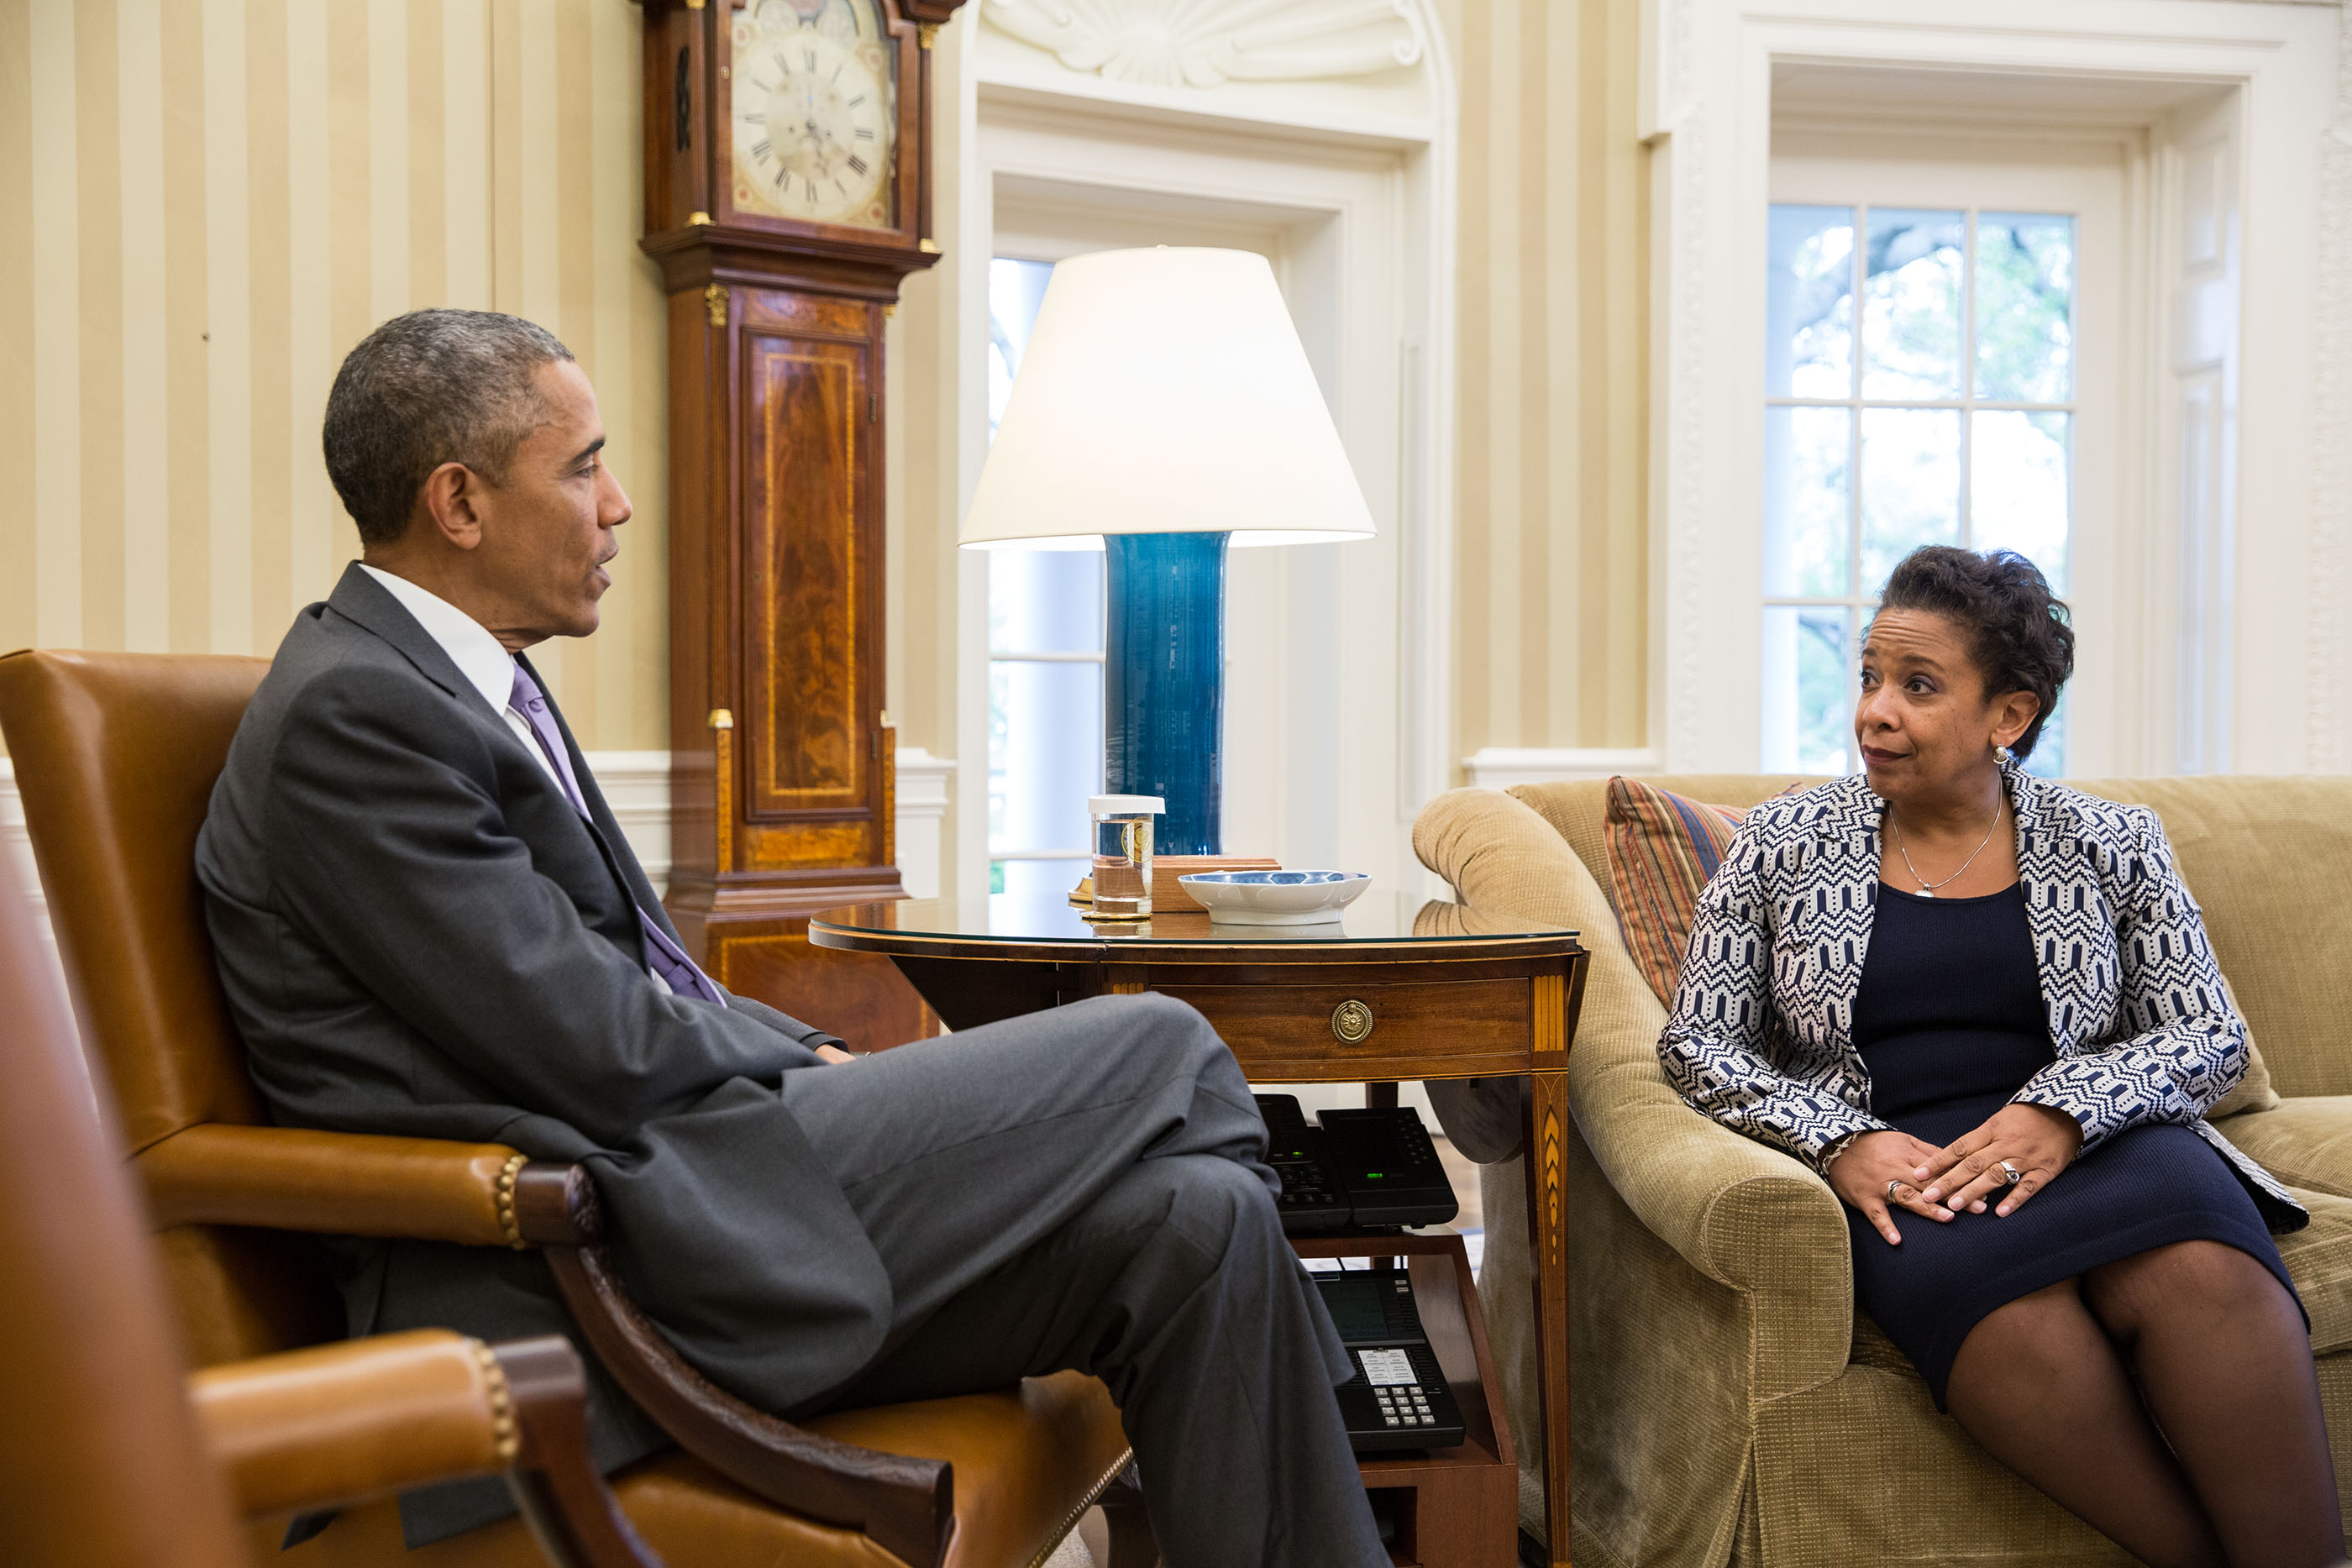 President Barack Obama meets with Attorney General Loretta Lynch in the Oval Office, April 27, 2015